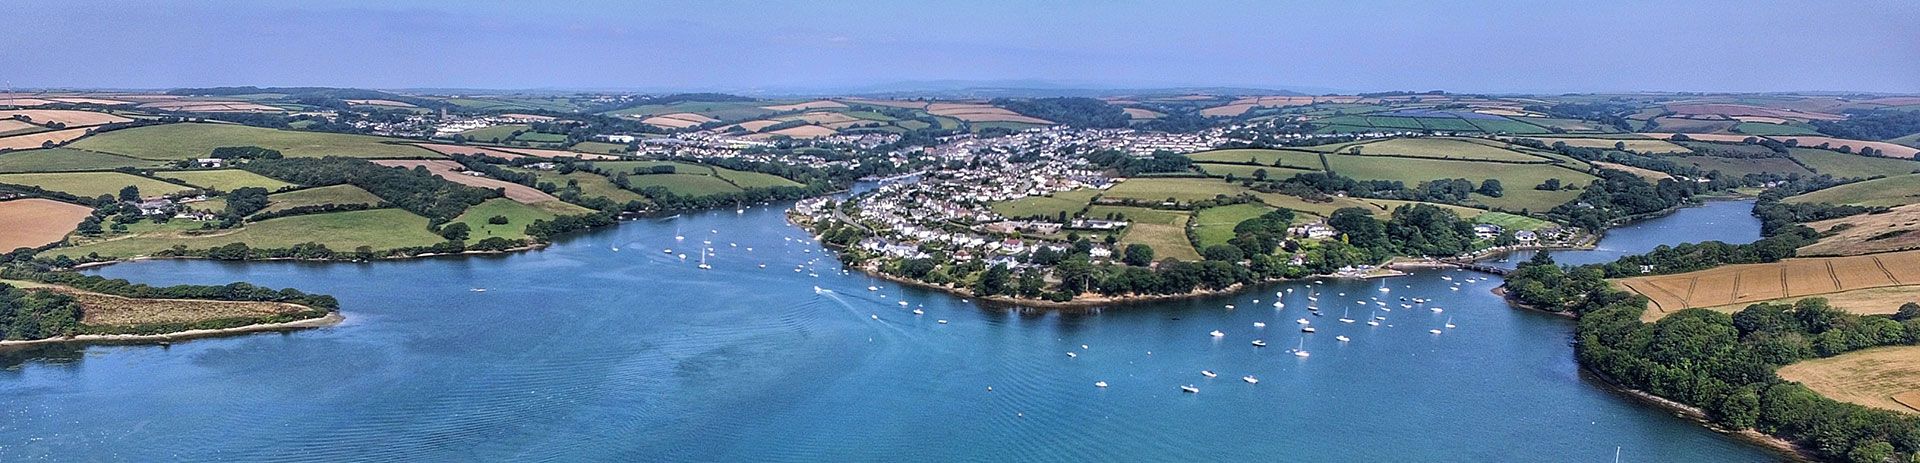 an aerial view of a large body of water surrounded by trees and fields in salcombe .